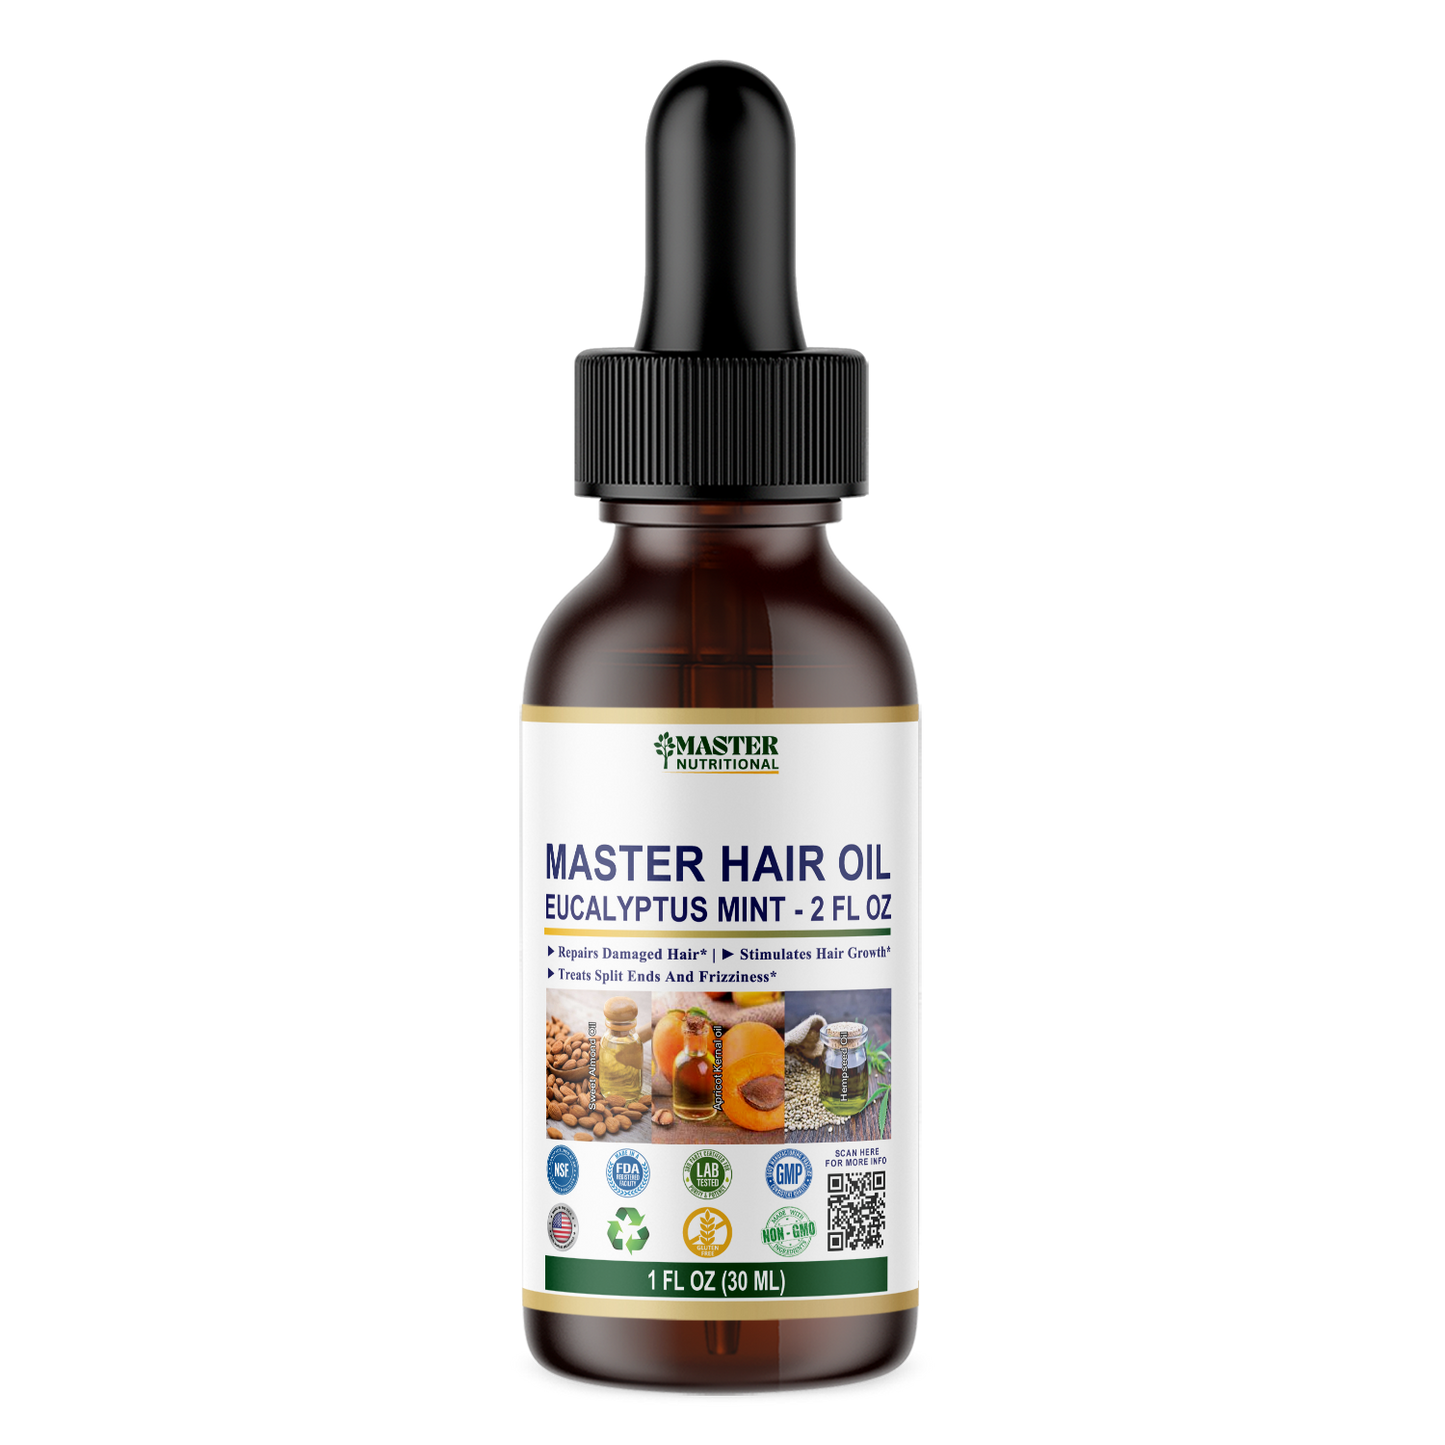 Master Hair Oil (Eucalyptus Mint): Revitalize Your Hair with No.1 Hair Growth Drops